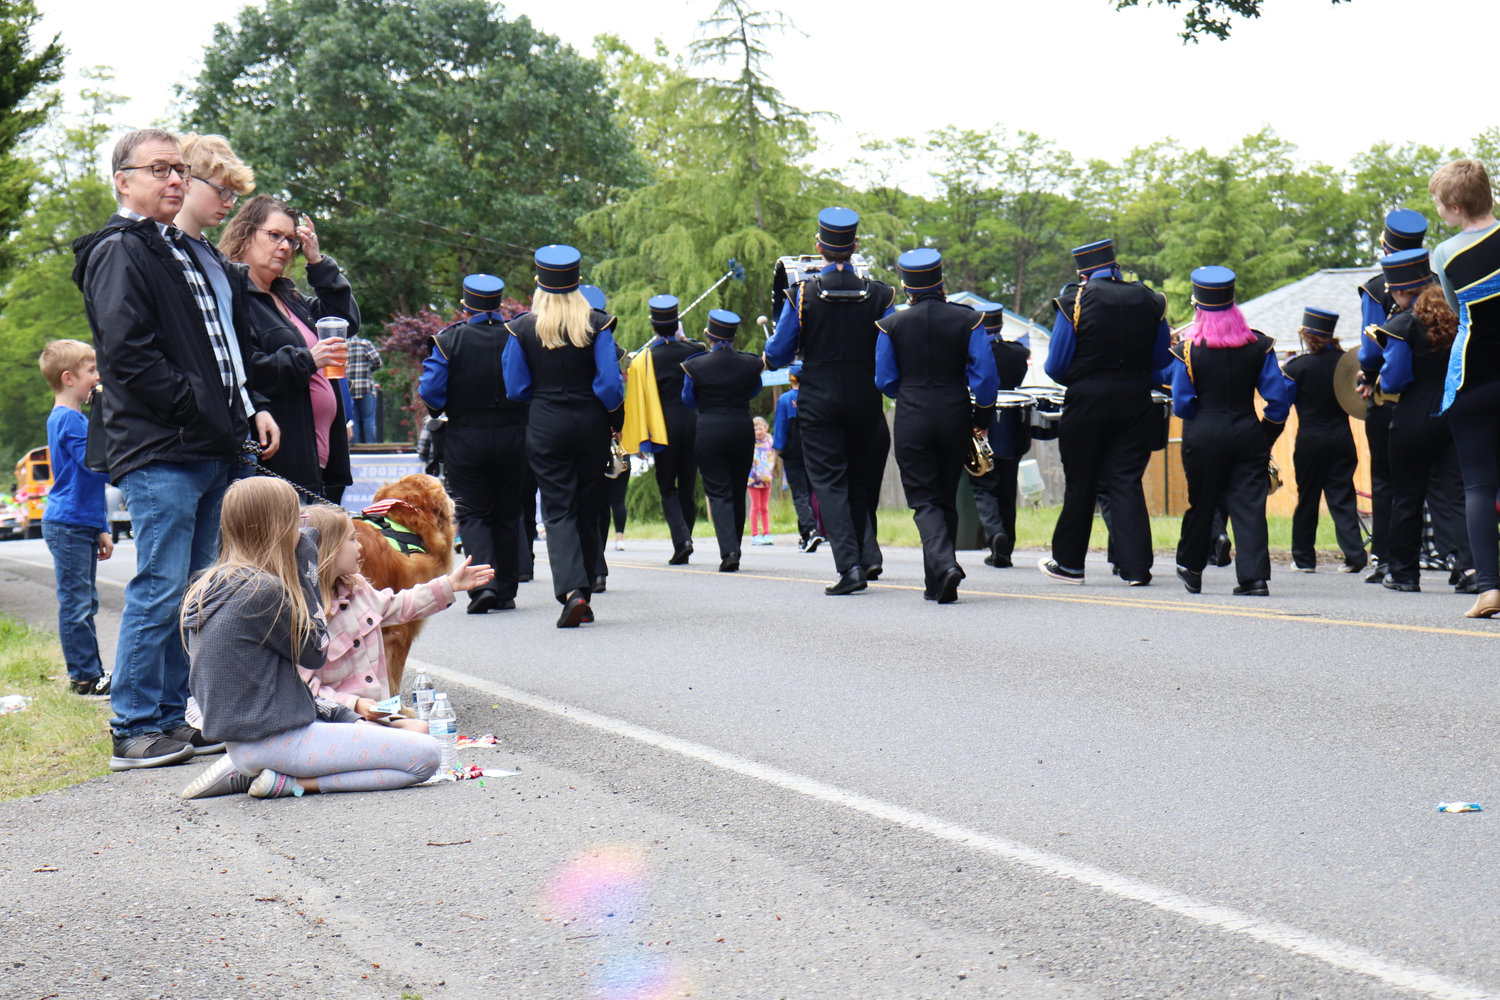 Spectators watch the Rochester High School marching band perform during the Swede Day Parade in Rochester on Saturday.